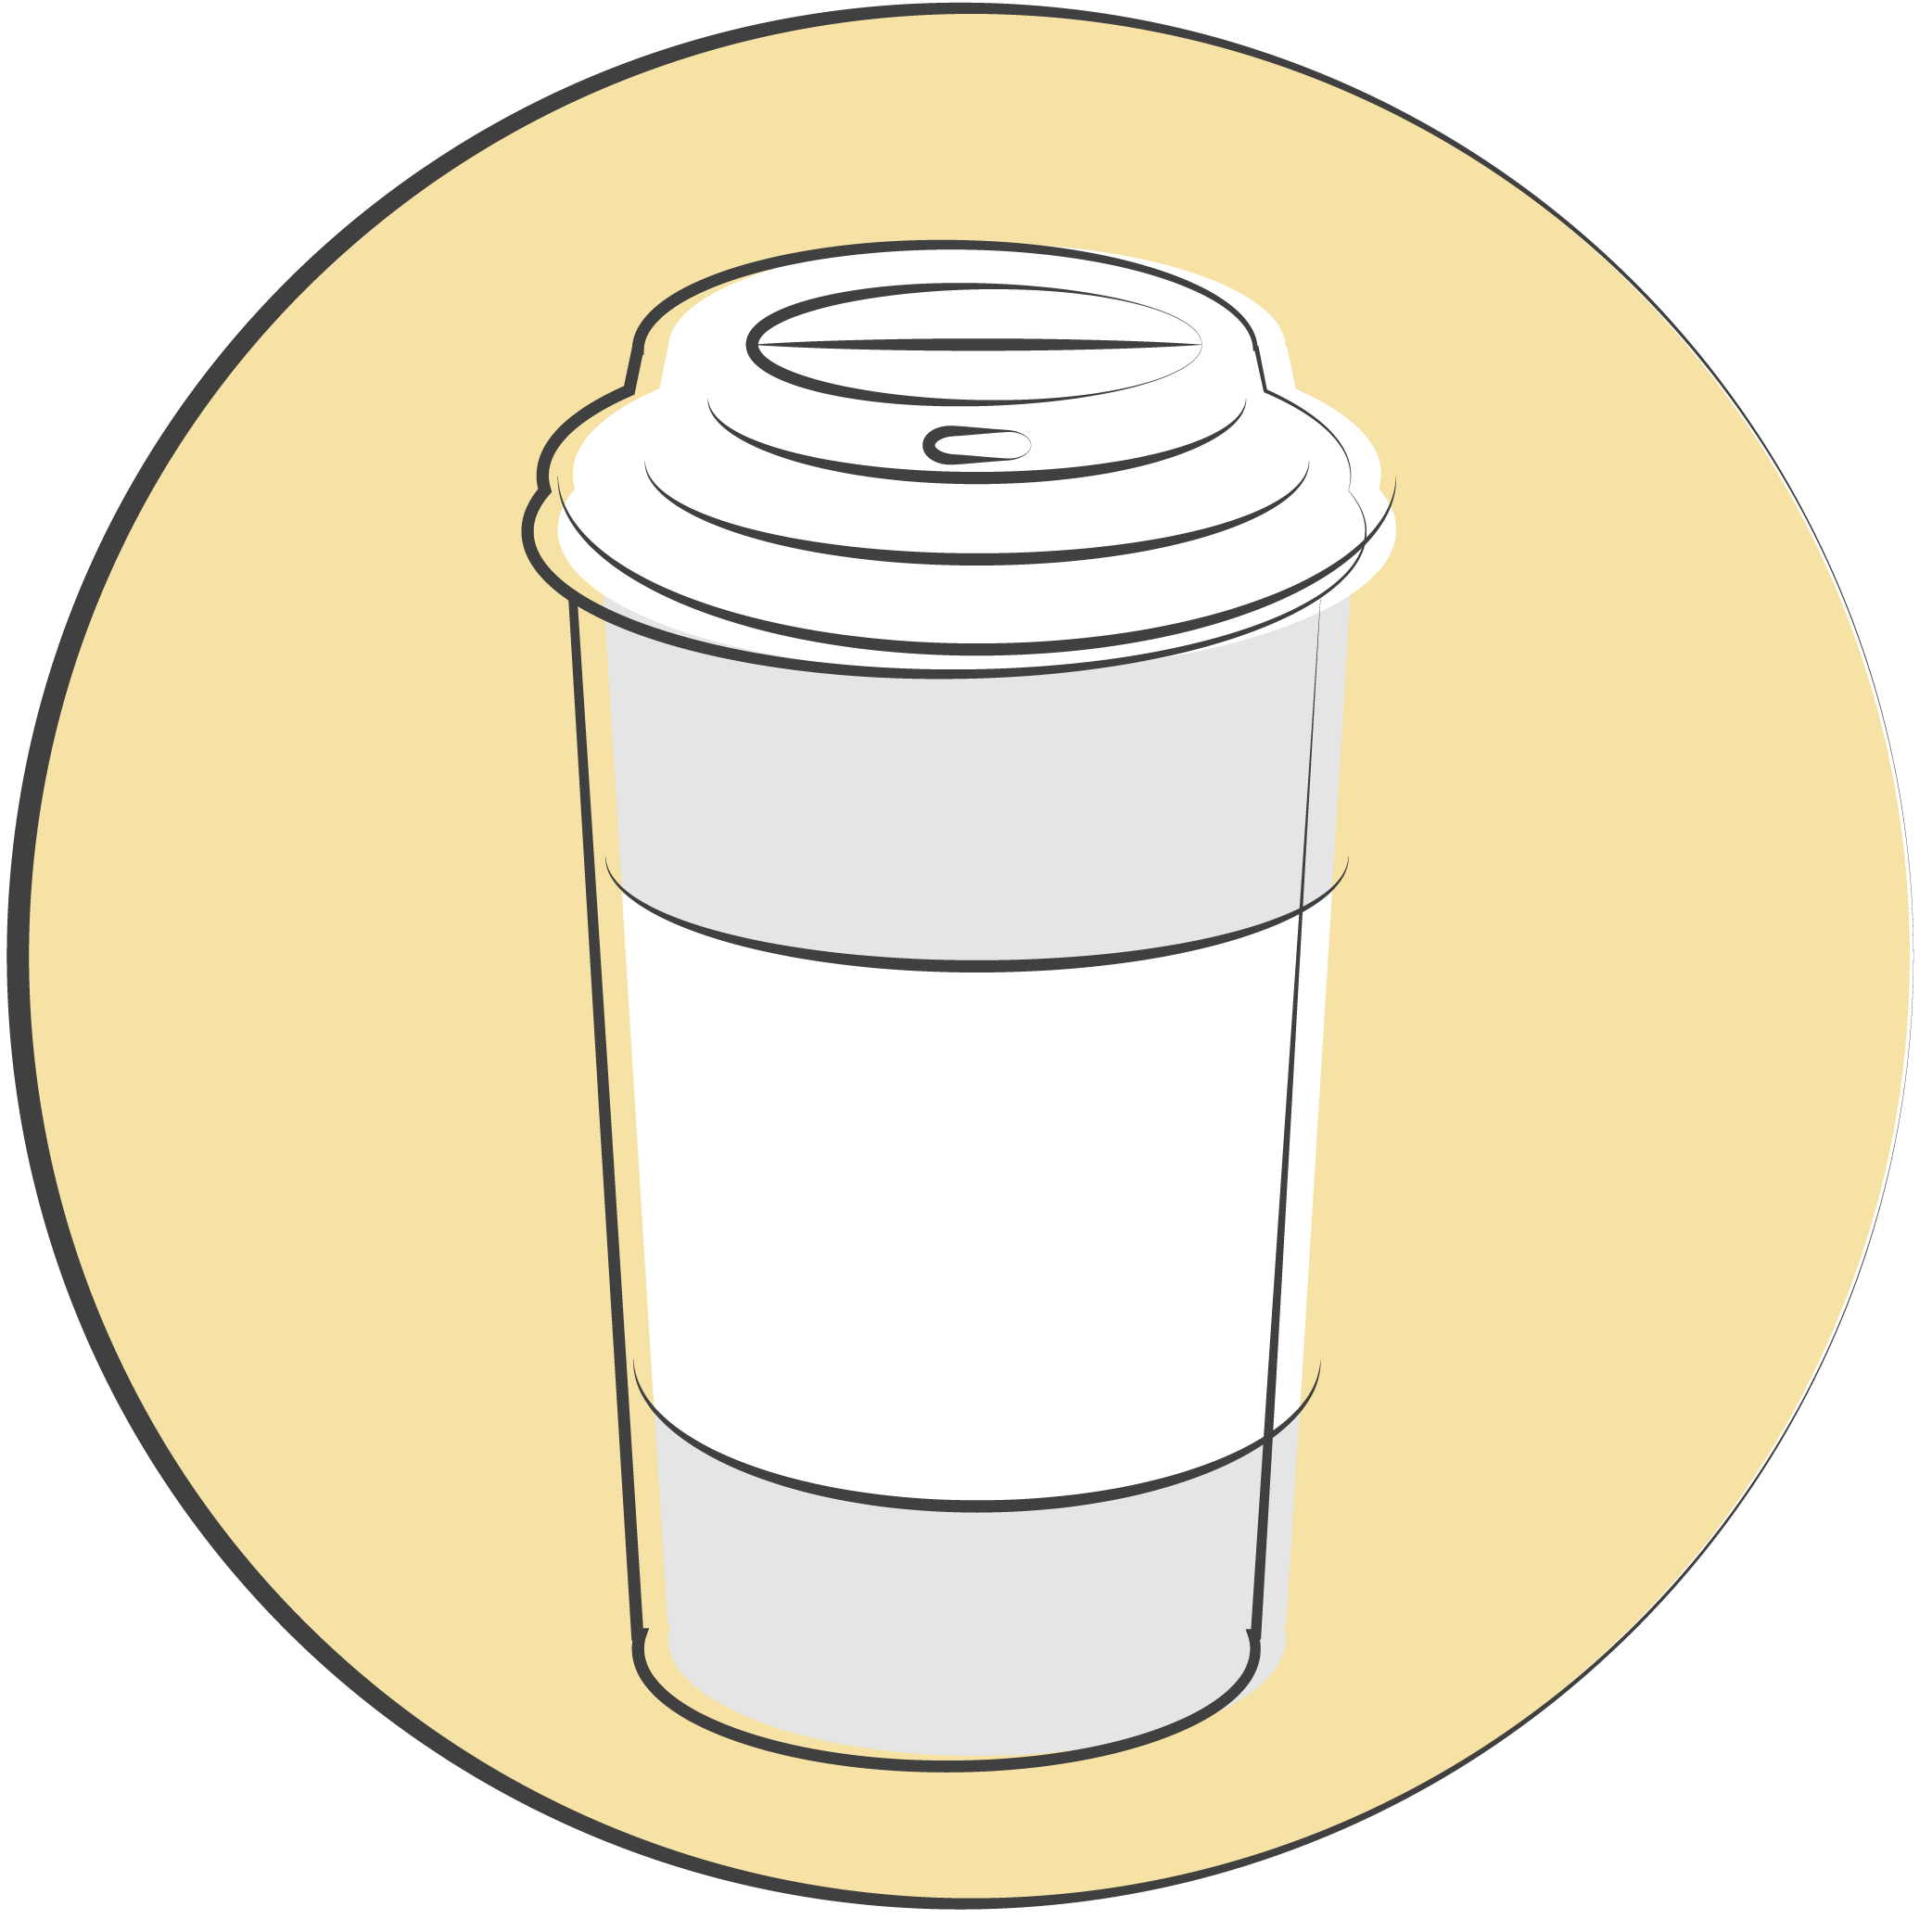 Illustration of a to-go coffee cup.